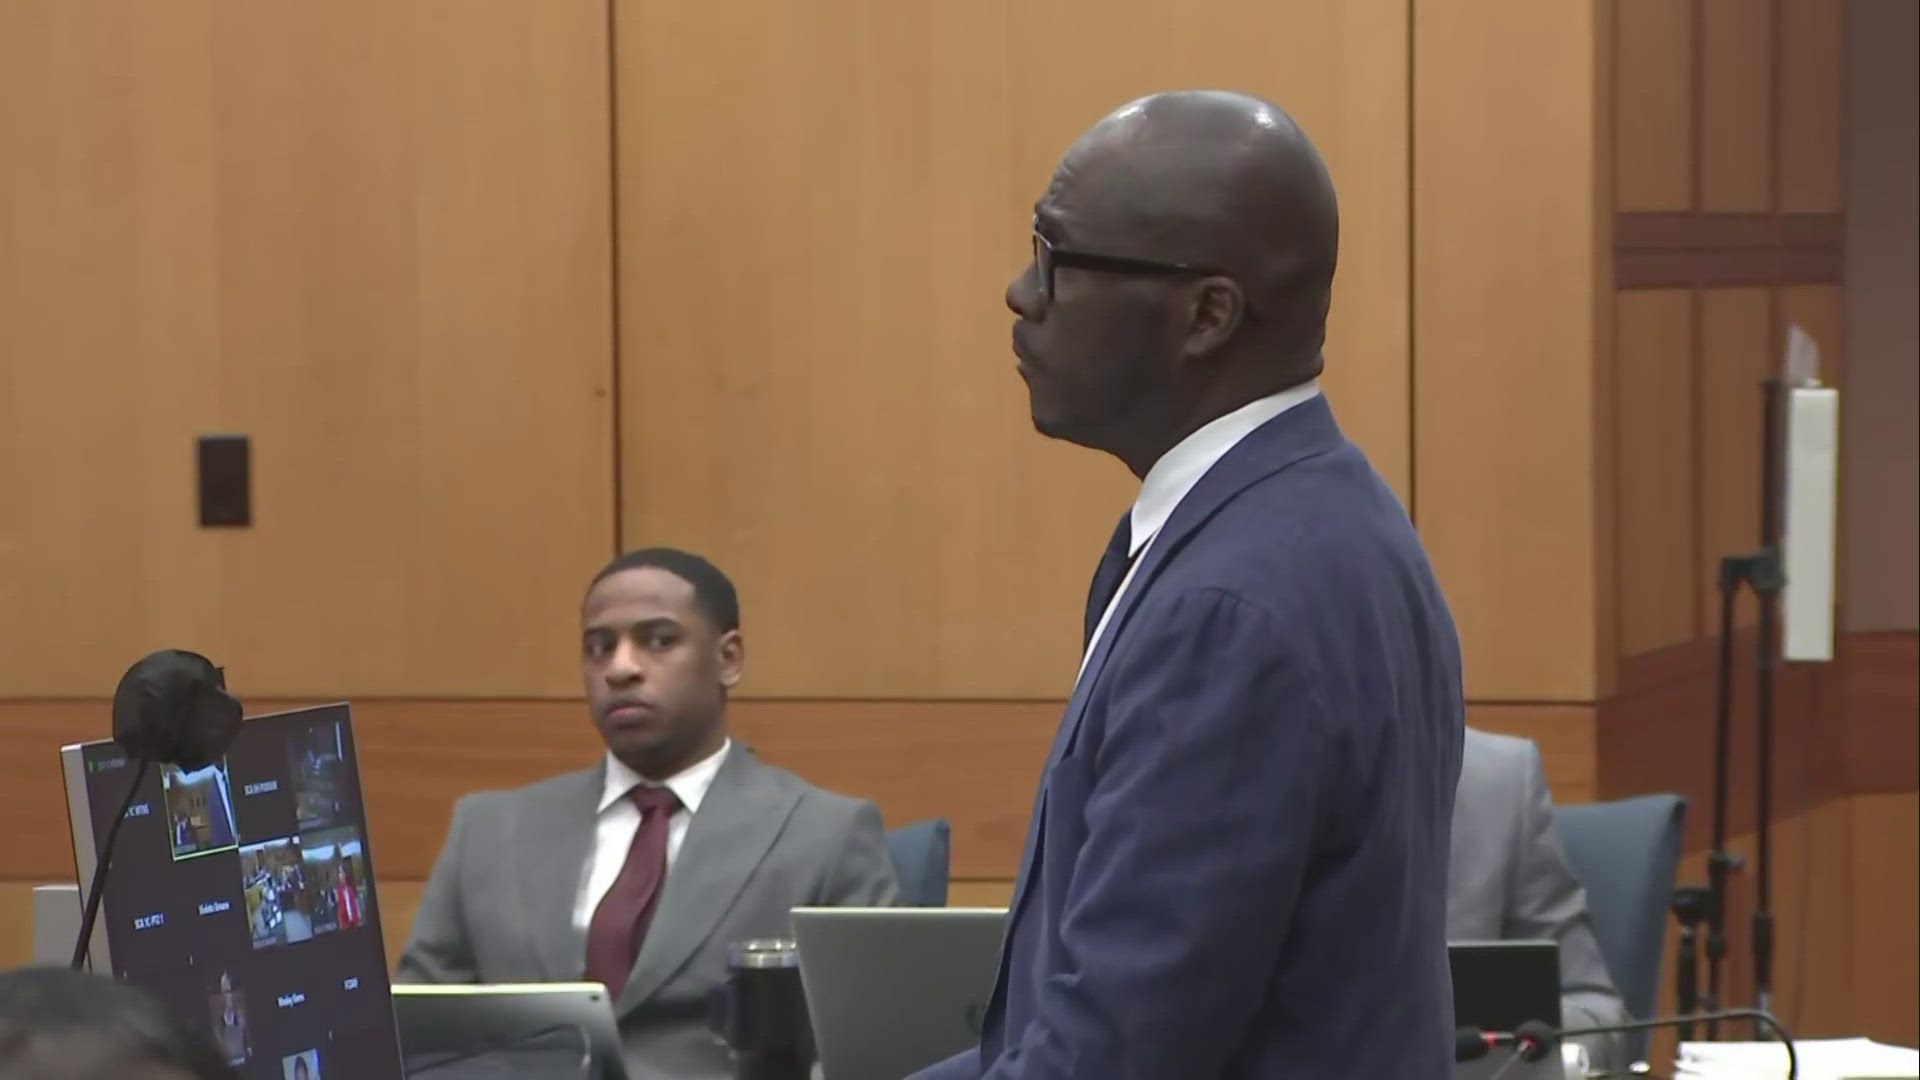 The trial involving Young Thug and the alleged YSL gang is ongoing in Atlanta.